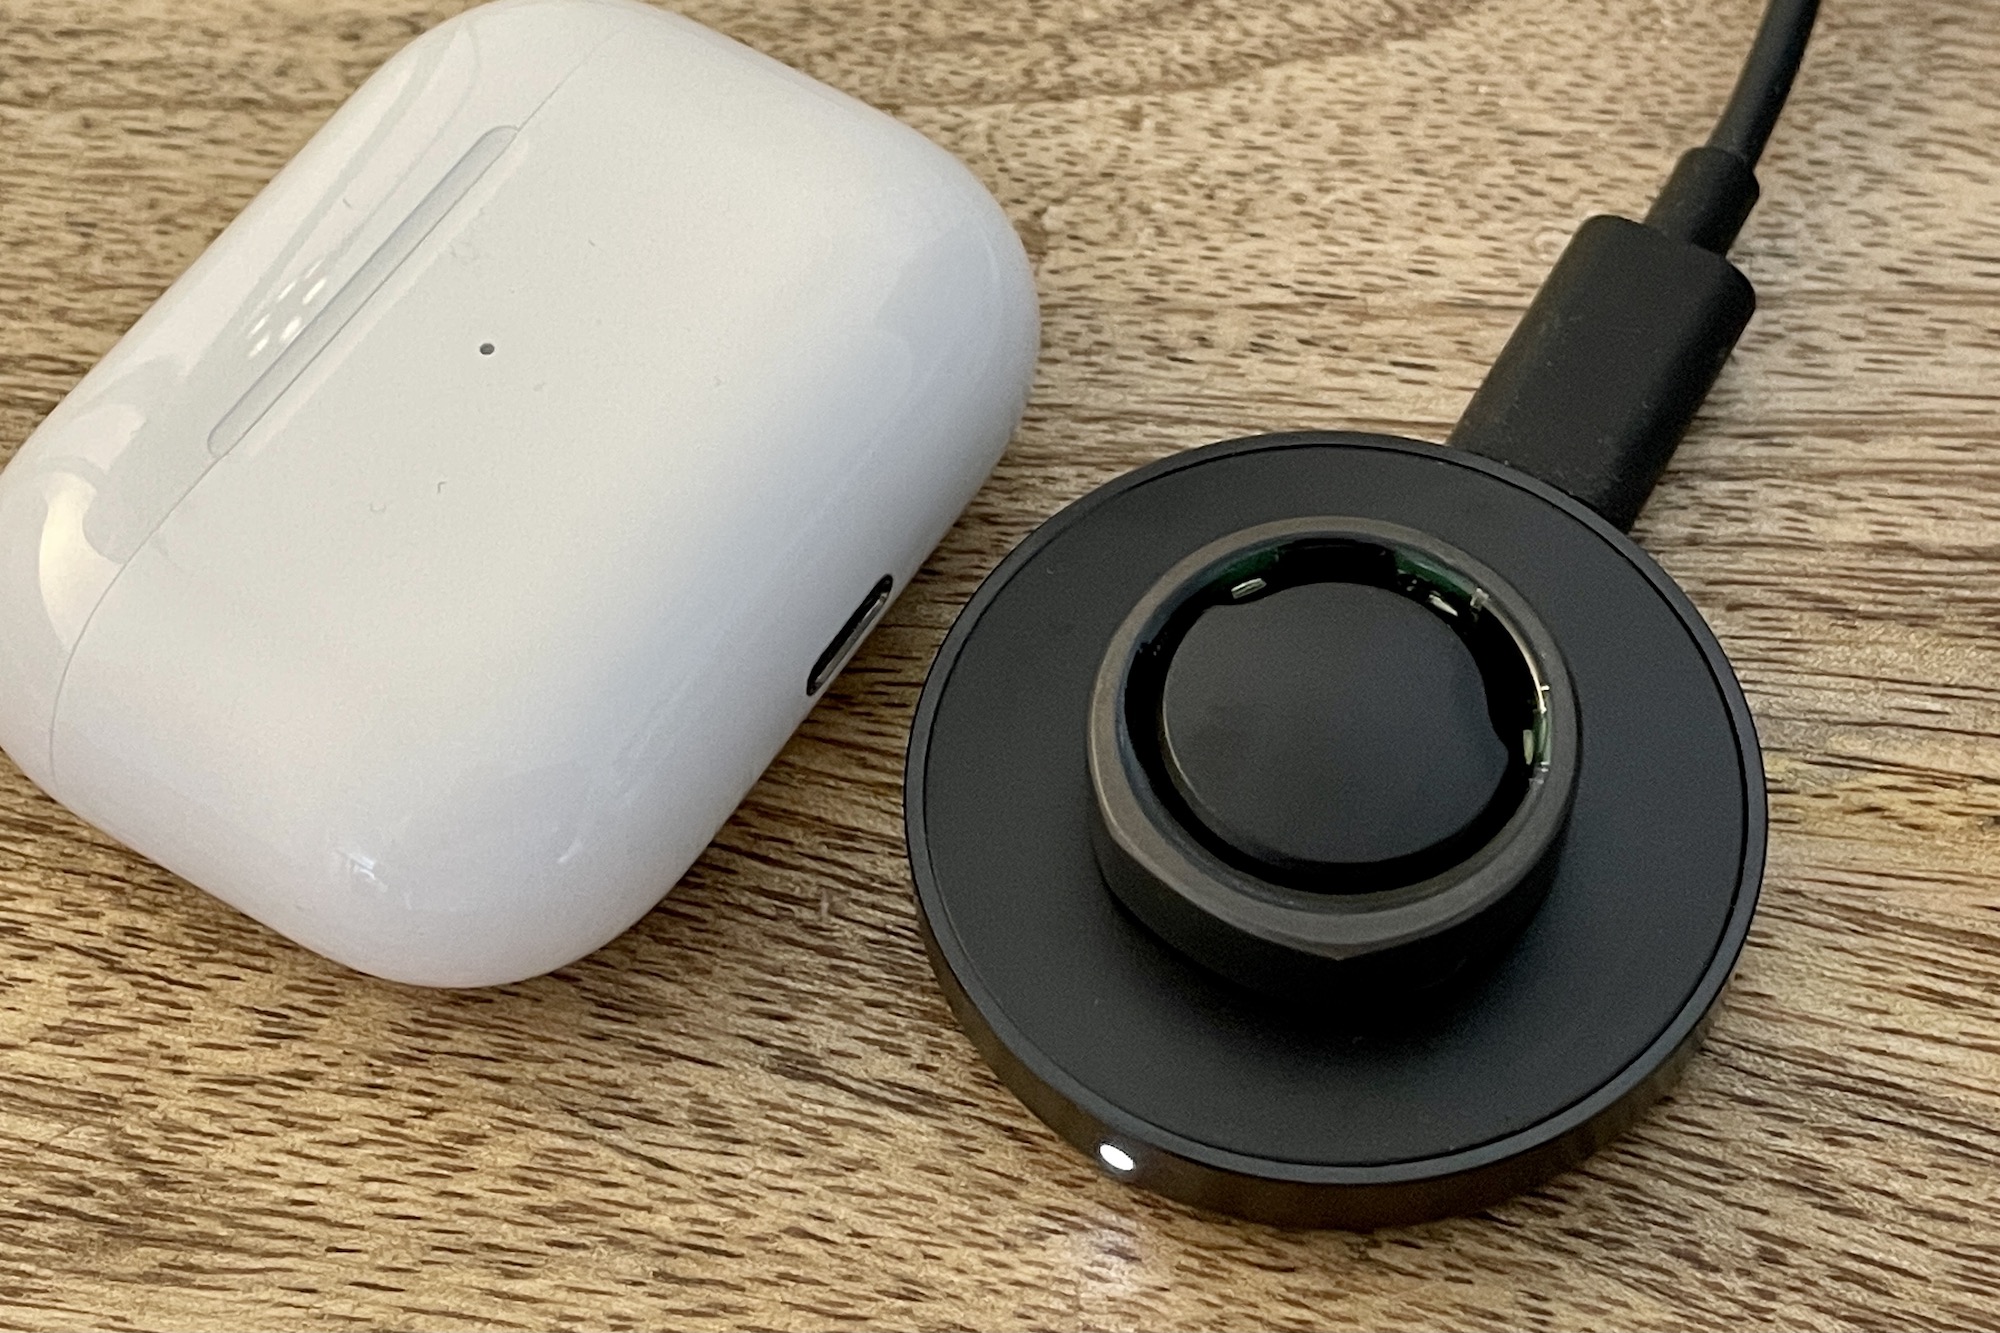 My gen 3 Oura ring will only charge to 1% and will not charge any